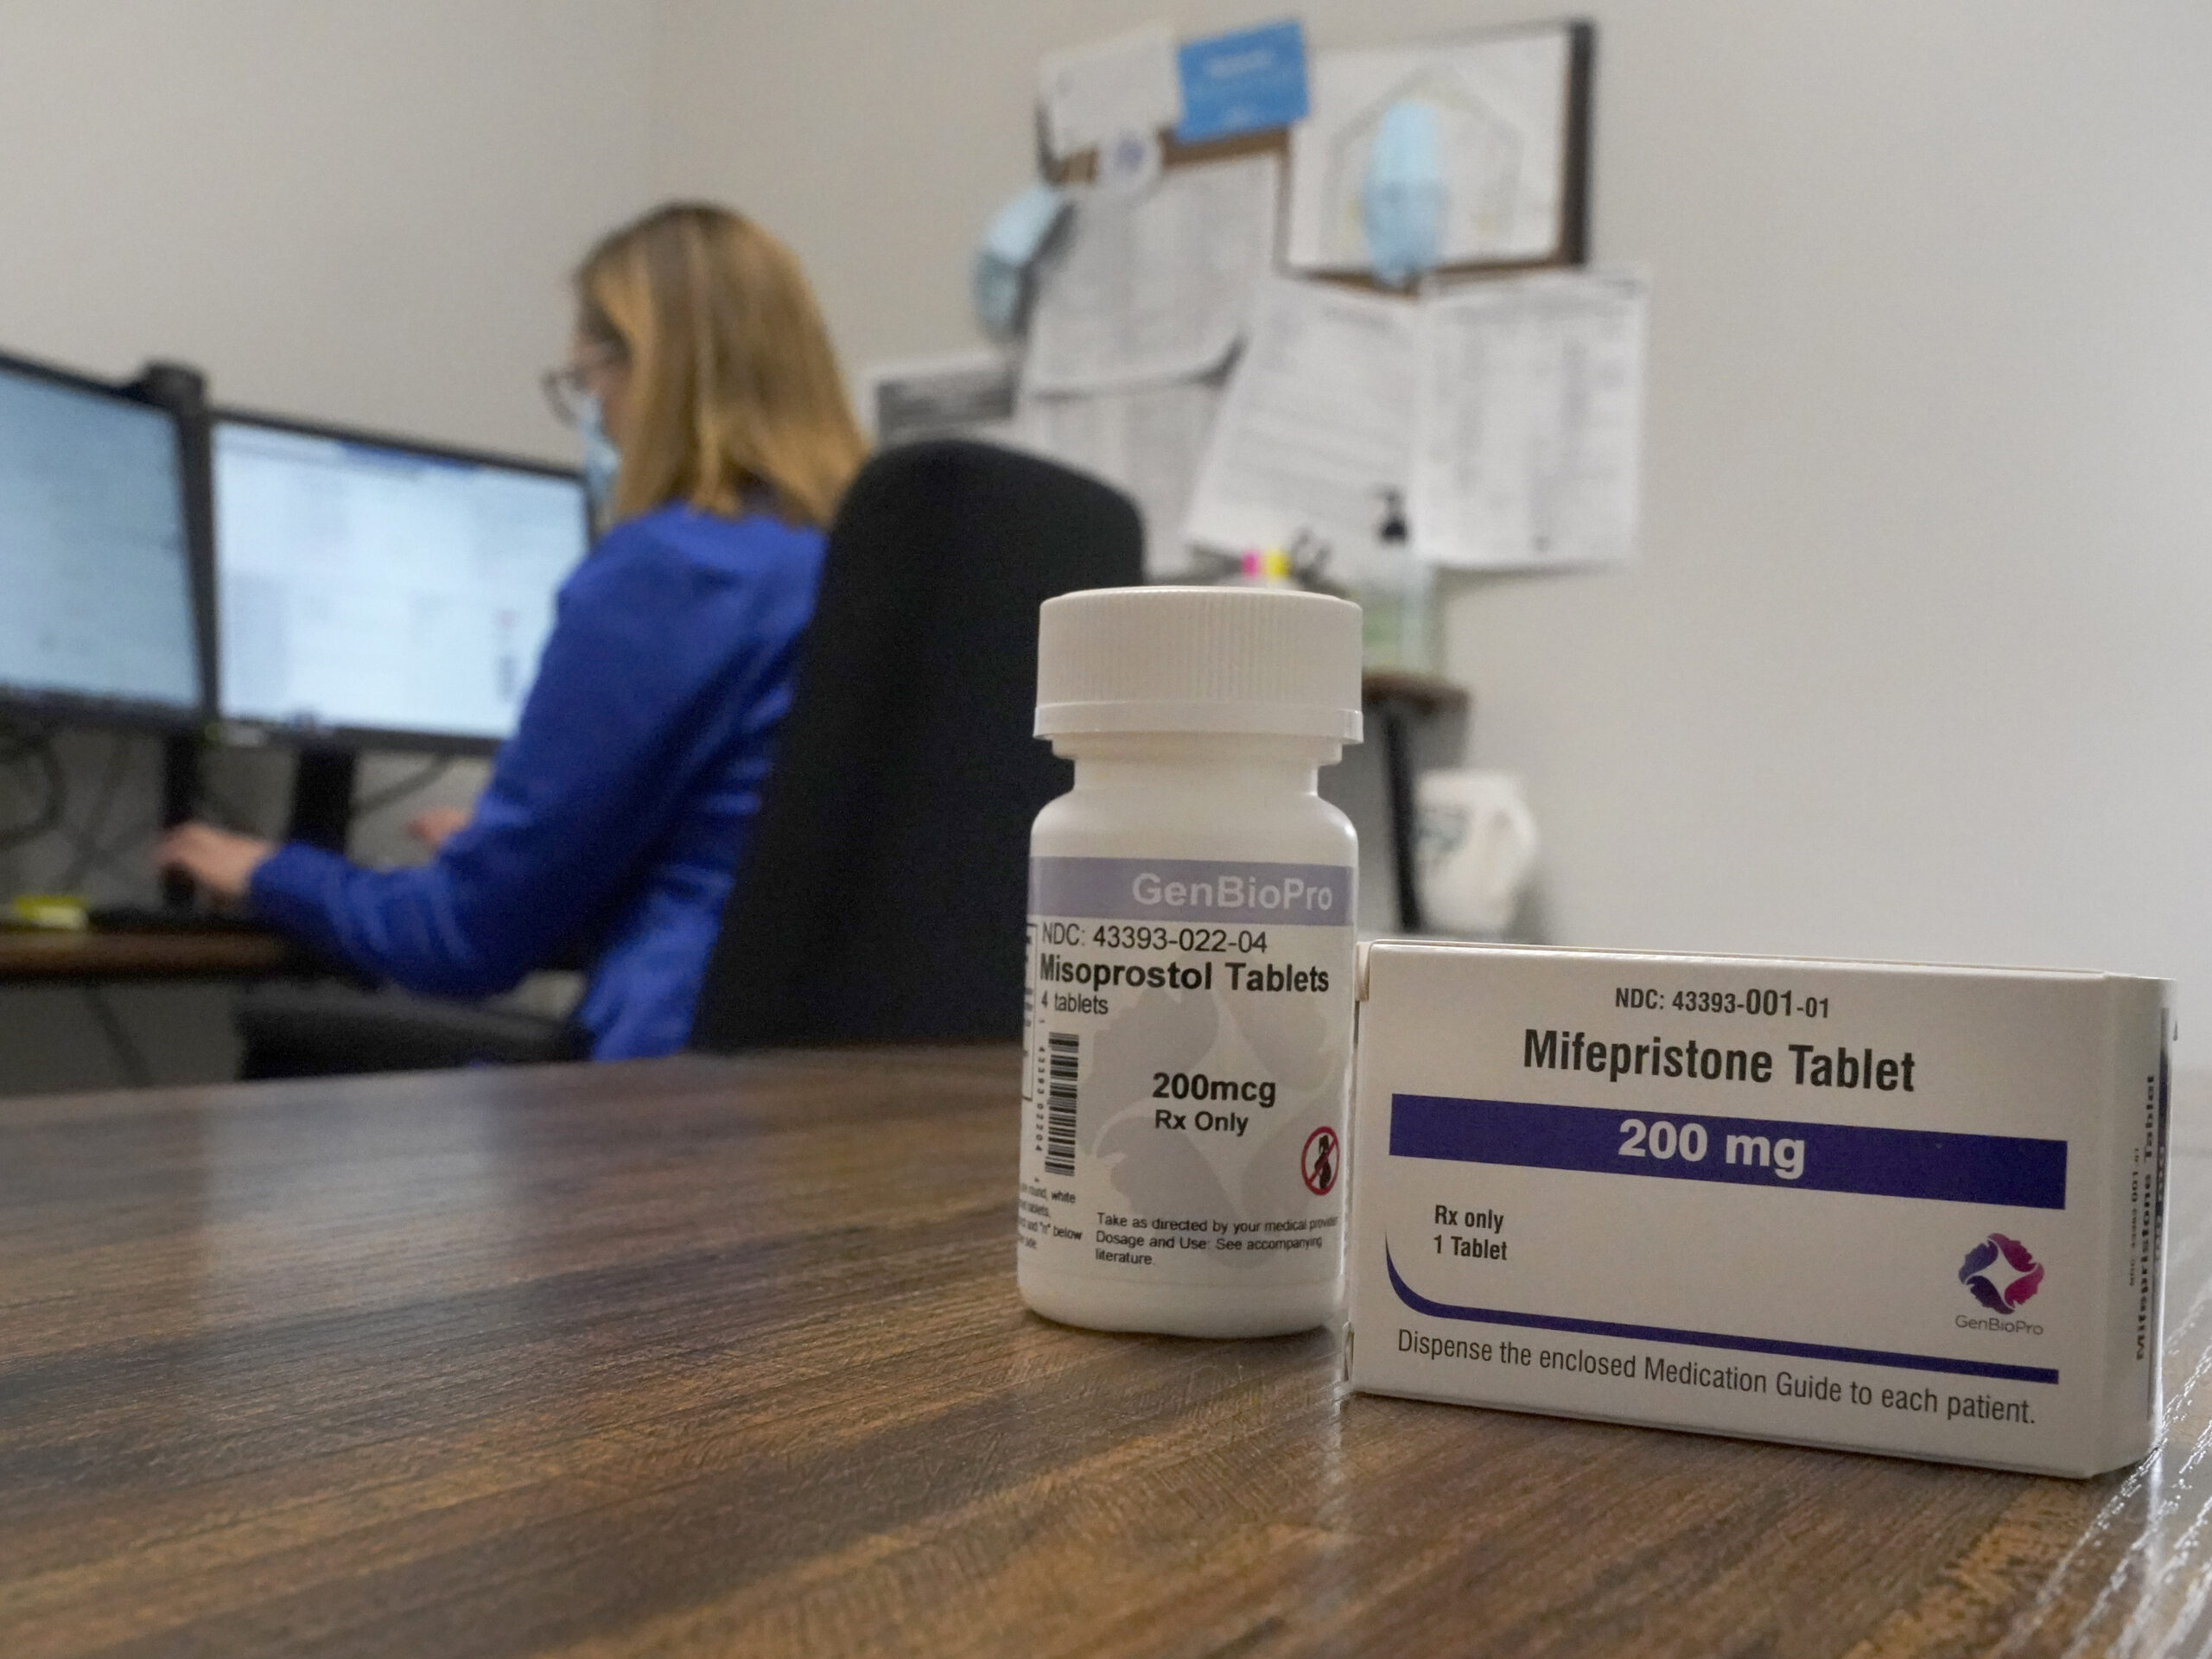 Abortion pills that patients got via telehealth and the mail are safe, study finds